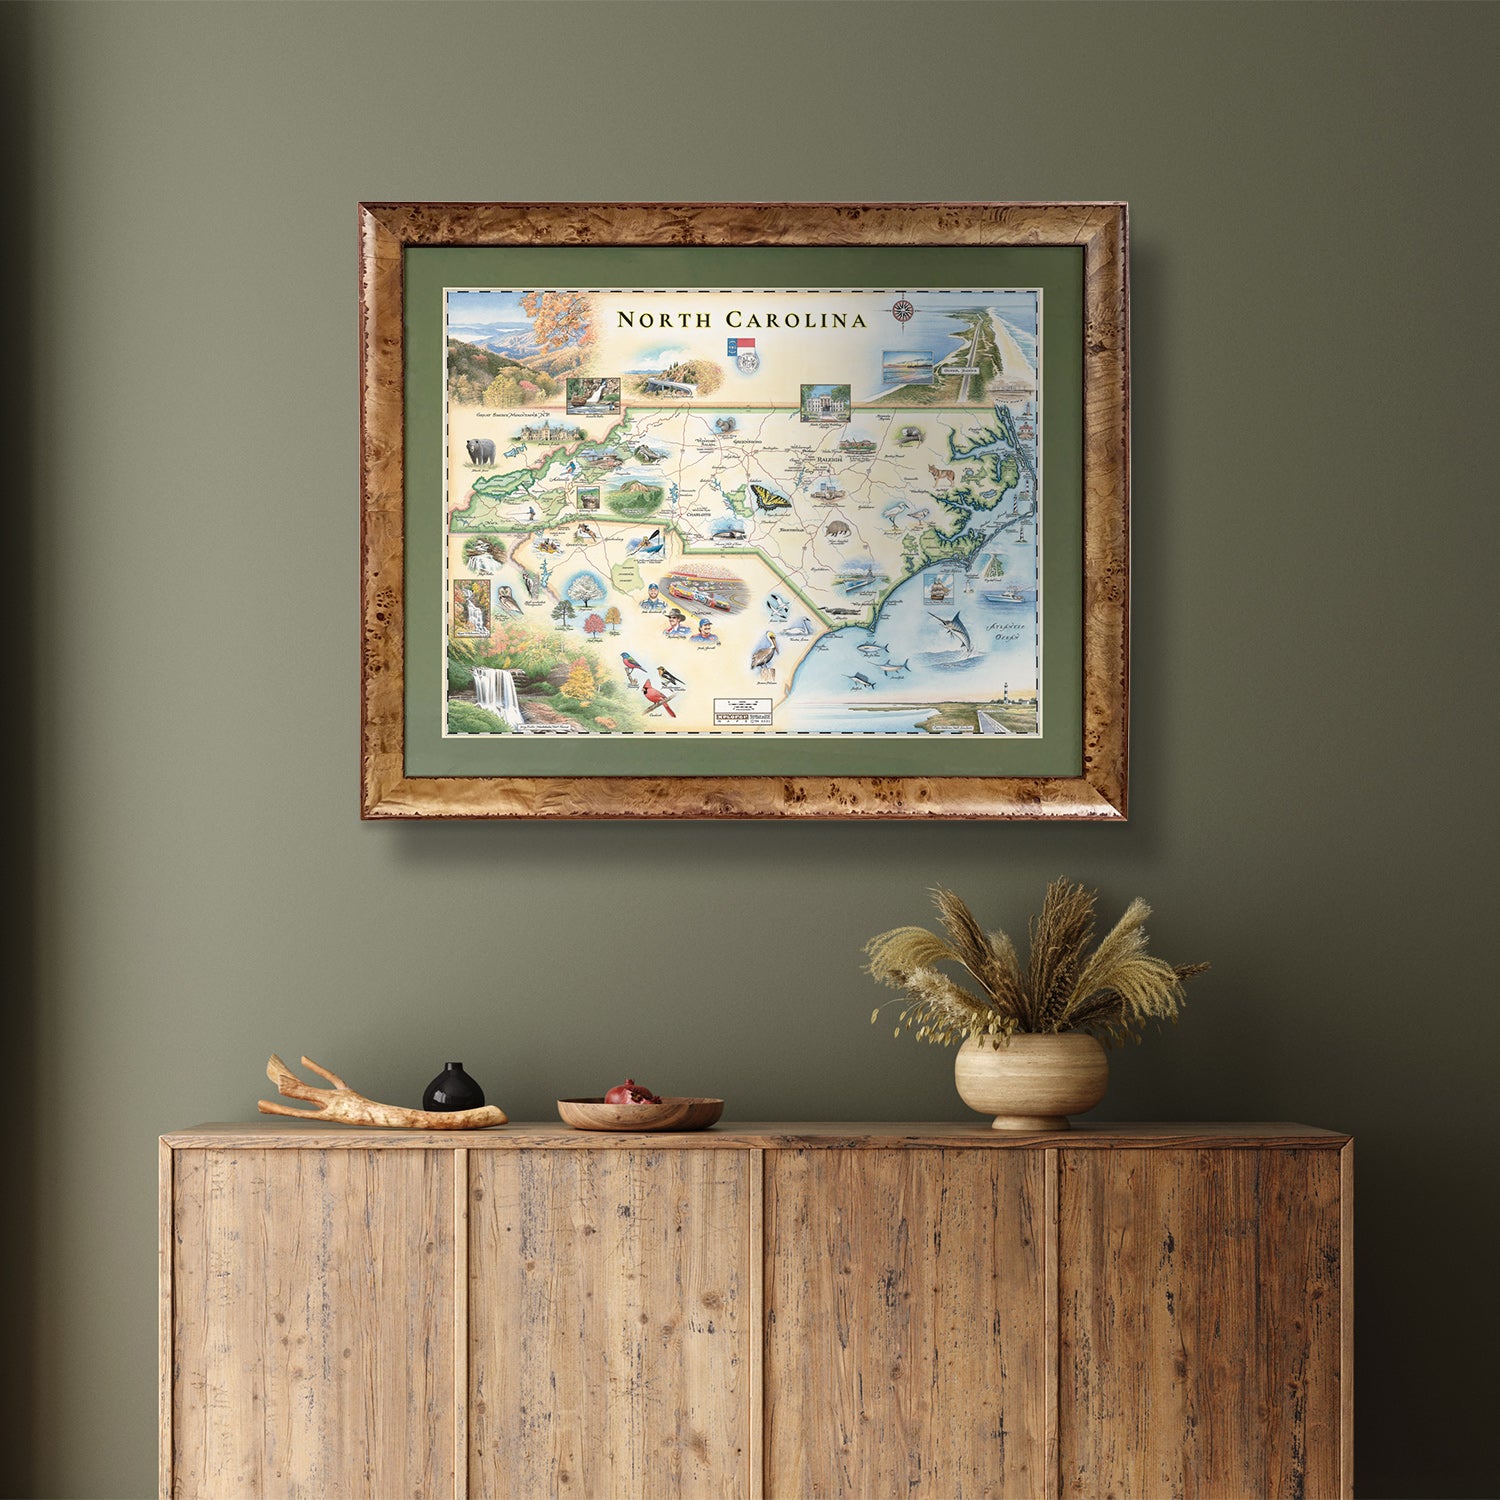 Xplorer Maps state map of North Carolina hangs on a greem wall above a table.